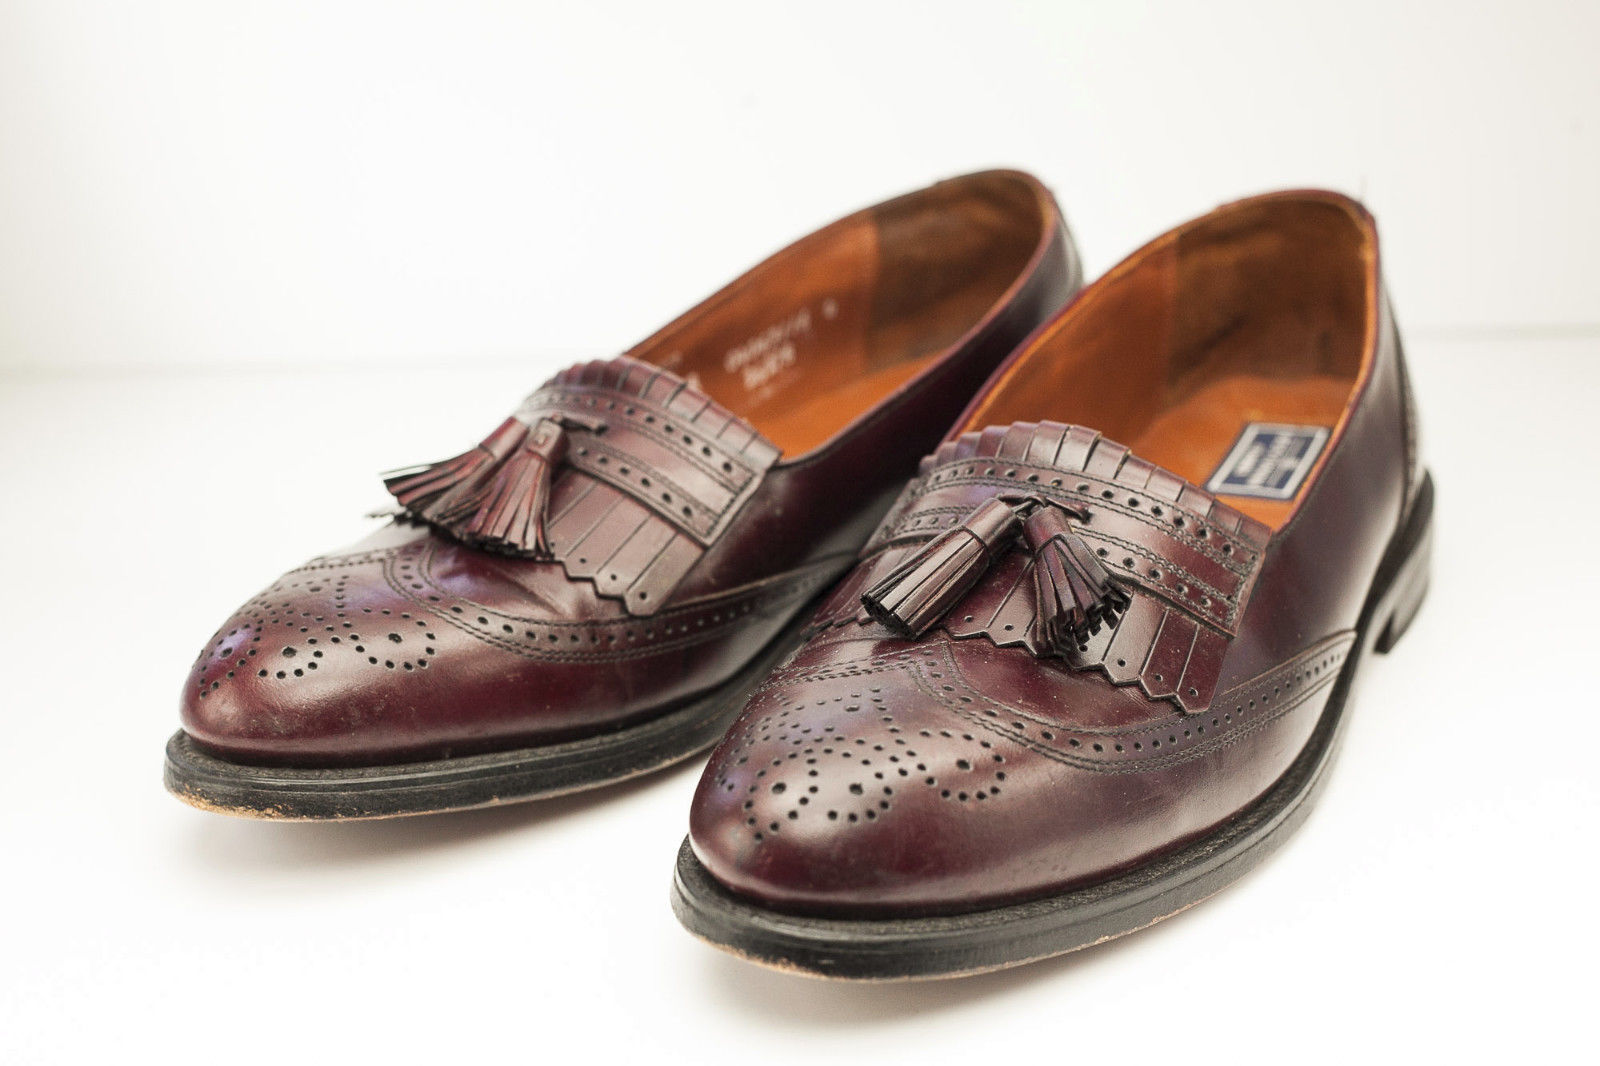 bostonian loafer shoes